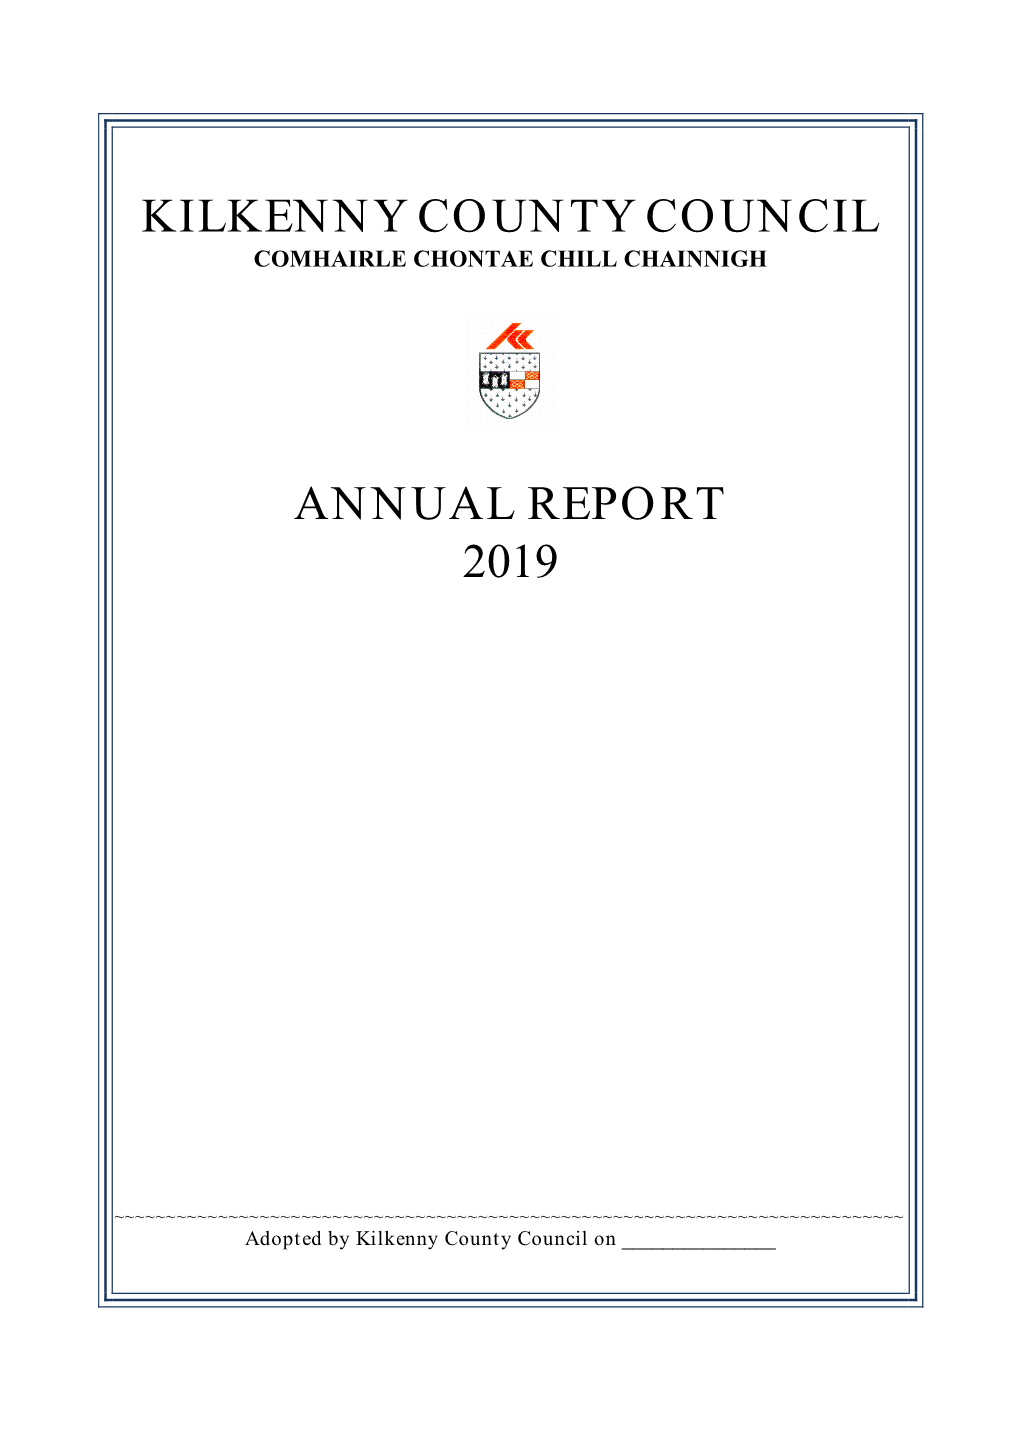 Kilkenny County Council Annual Report 2019